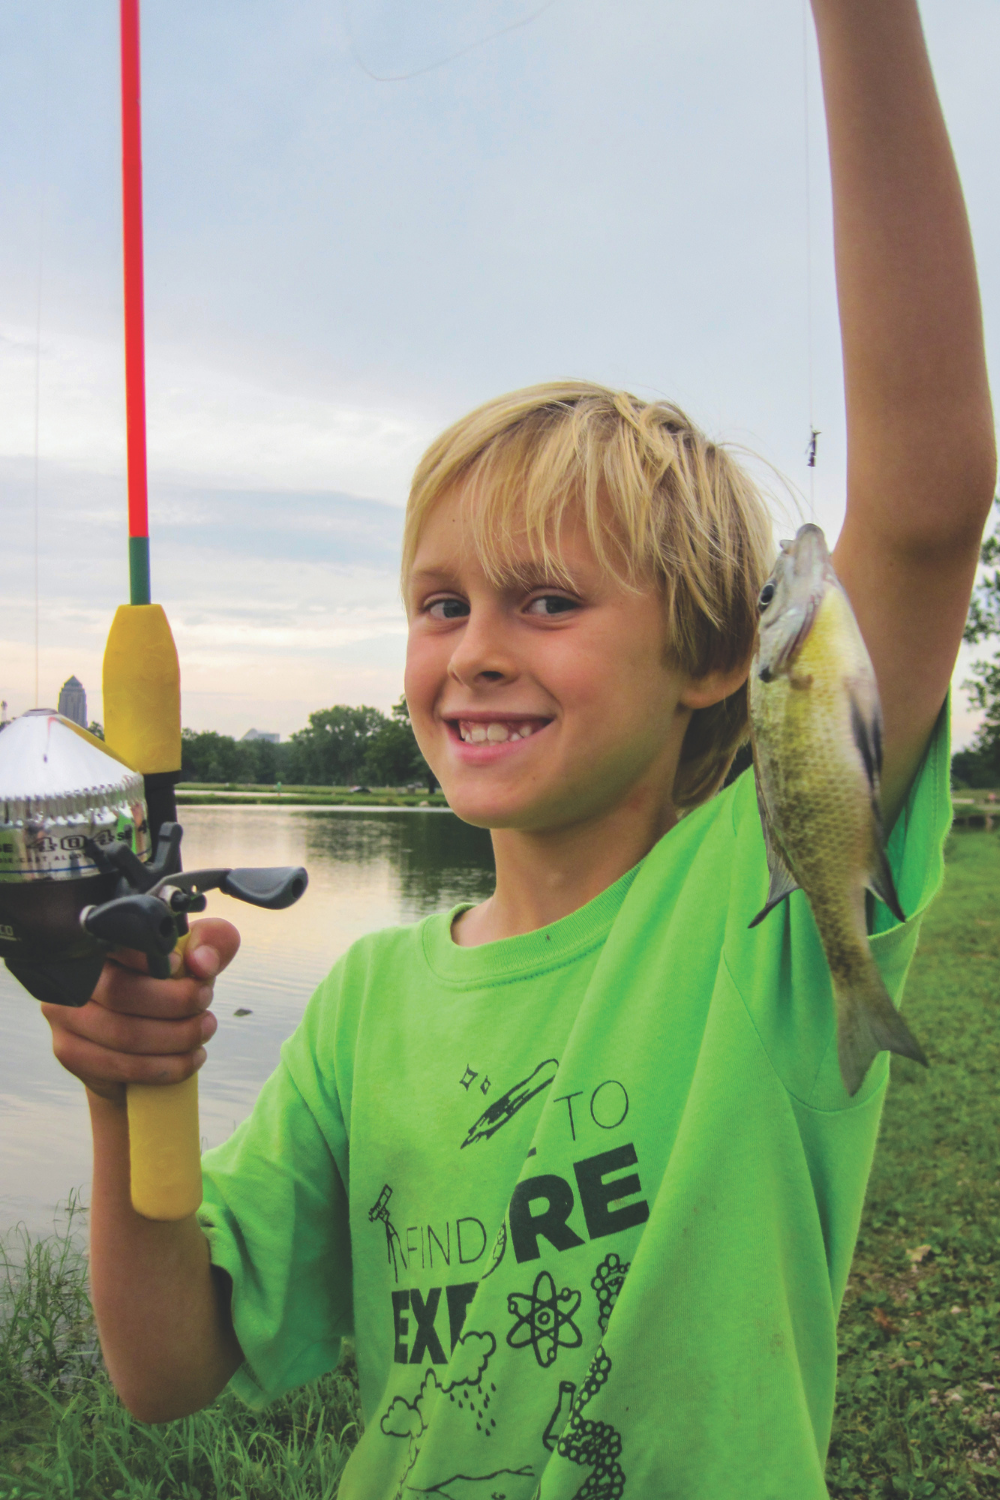 2021 Iowa Outdoors Spring Fishing Forecast - DNR News Releases